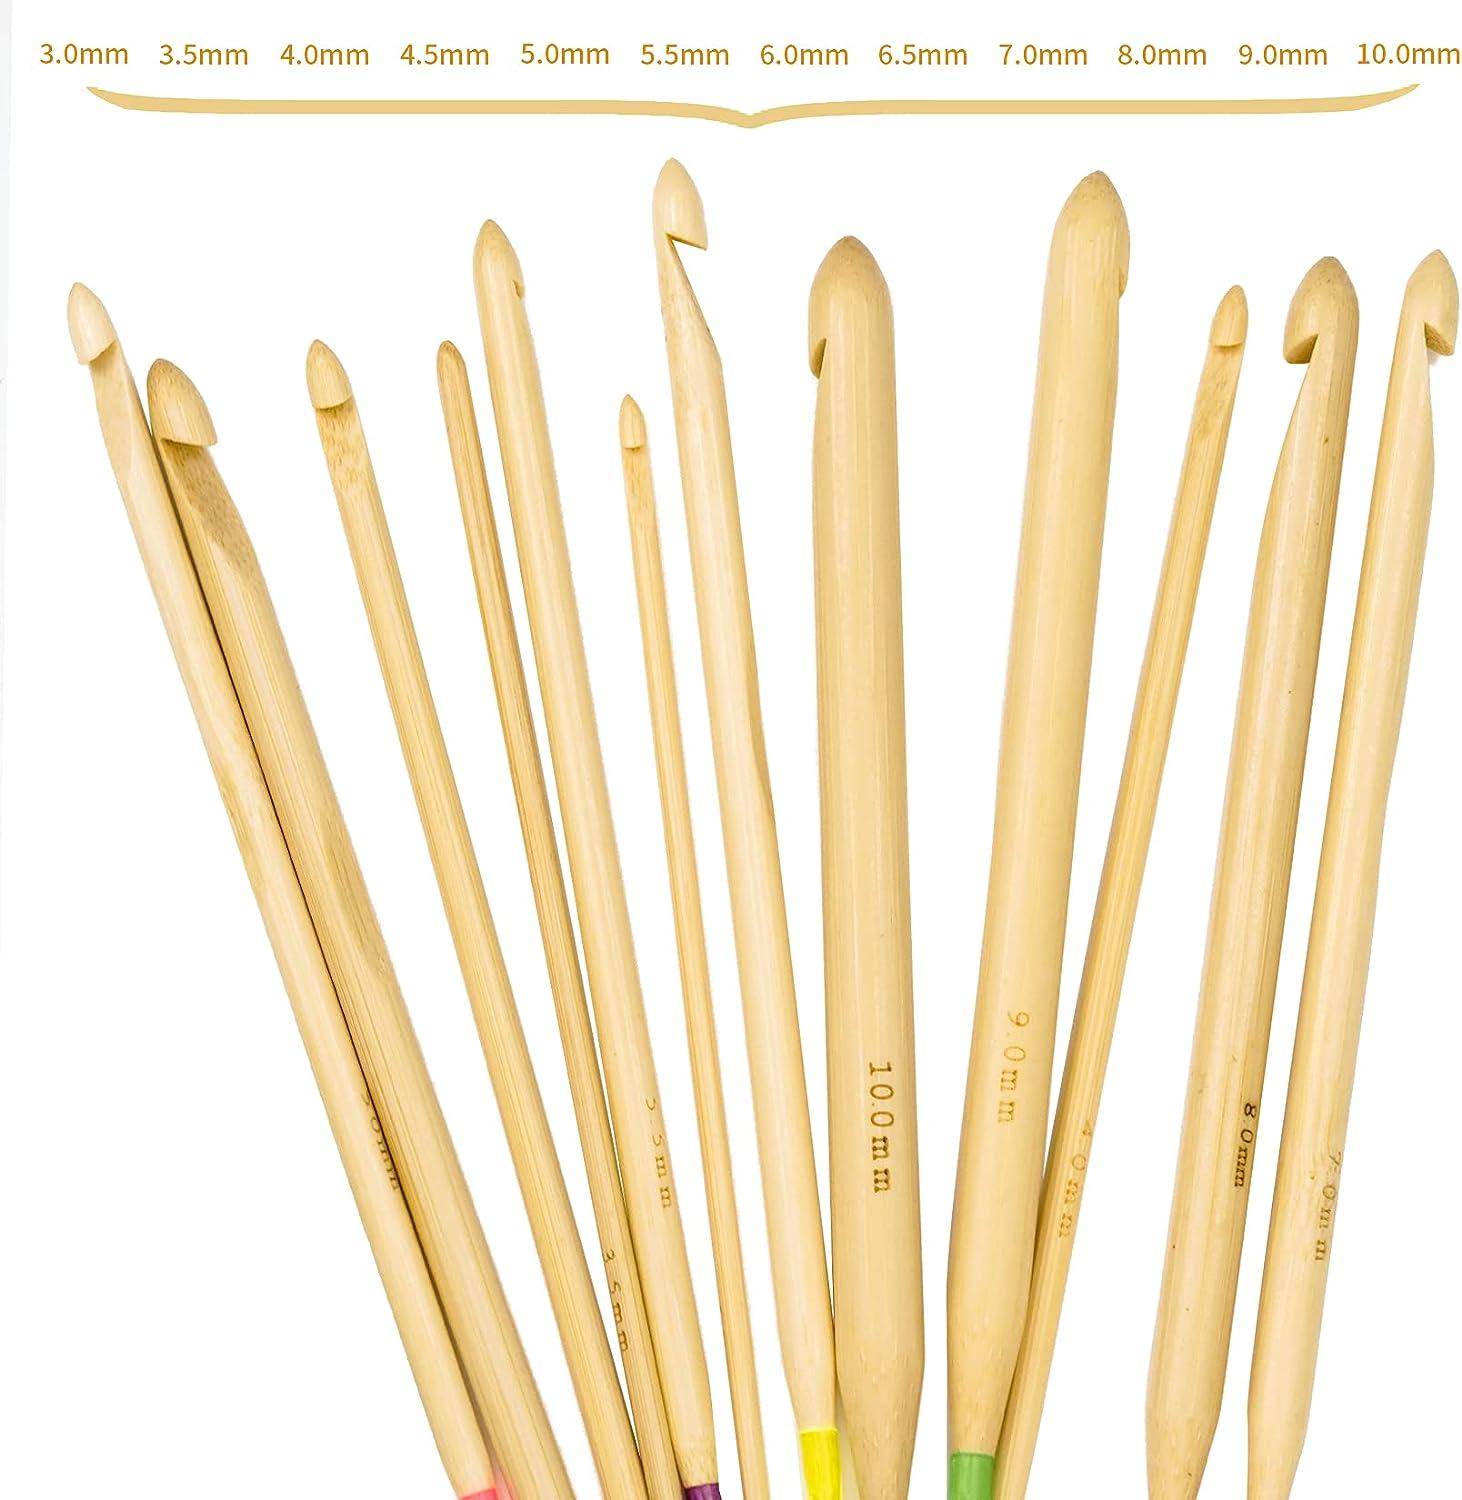 12 Pieces Bamboo Crochet Hooks Set, Large Crocheting Hook Knitting Needles  for Coarse Yarn (12 Sizes 3mm to 10mm in Diameter) 